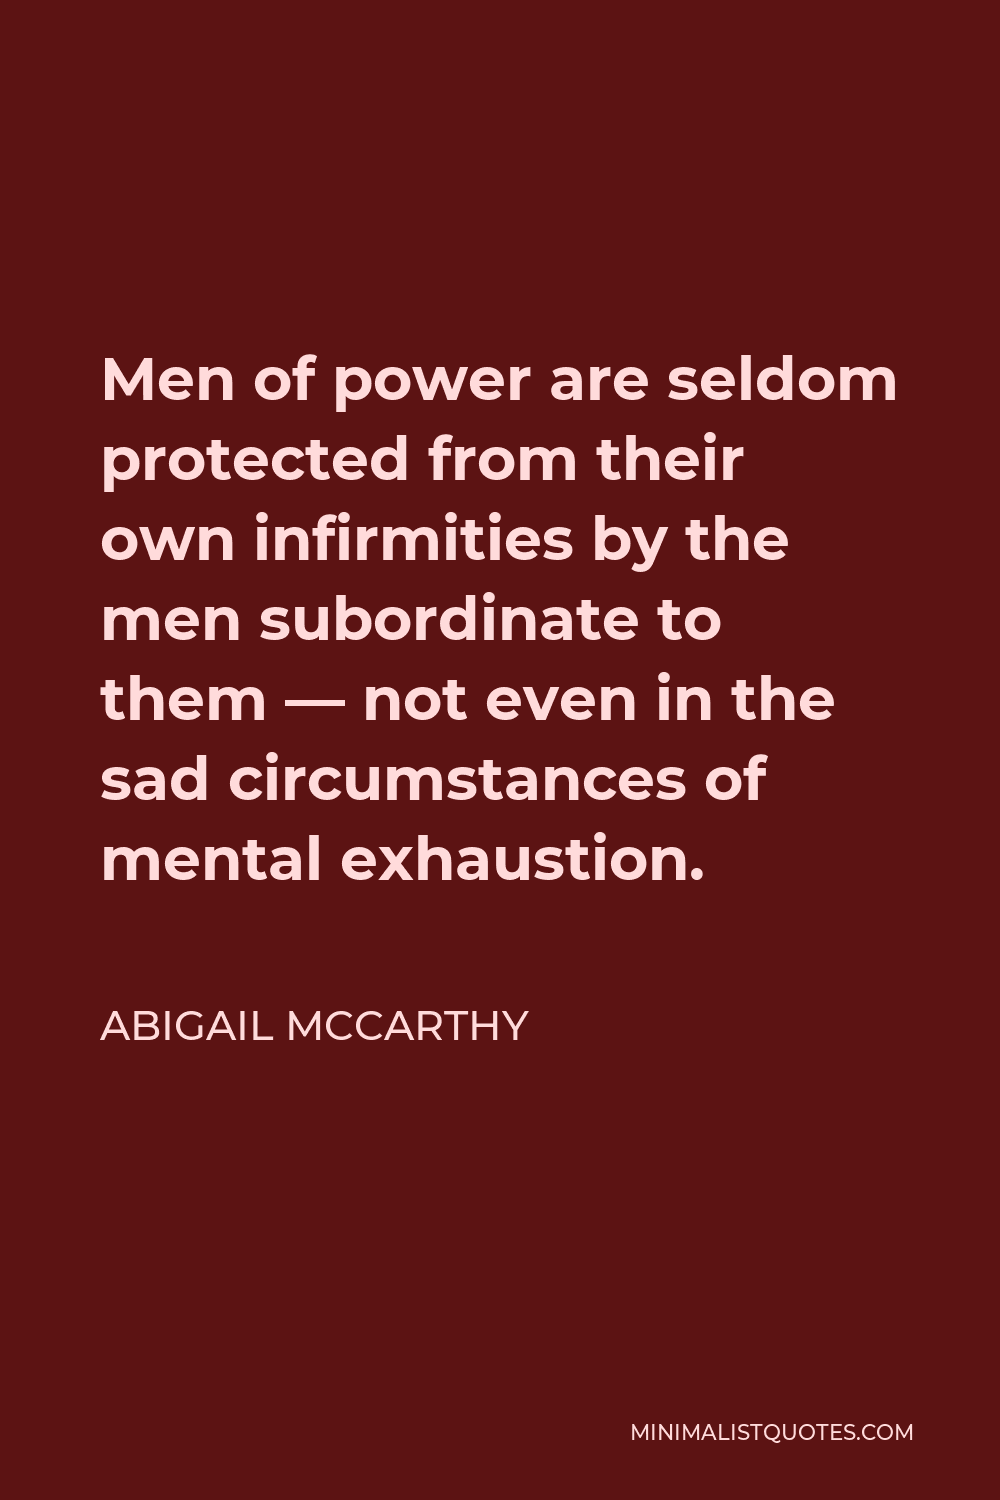 Abigail McCarthy Quote - Men of power are seldom protected from their own infirmities by the men subordinate to them — not even in the sad circumstances of mental exhaustion.